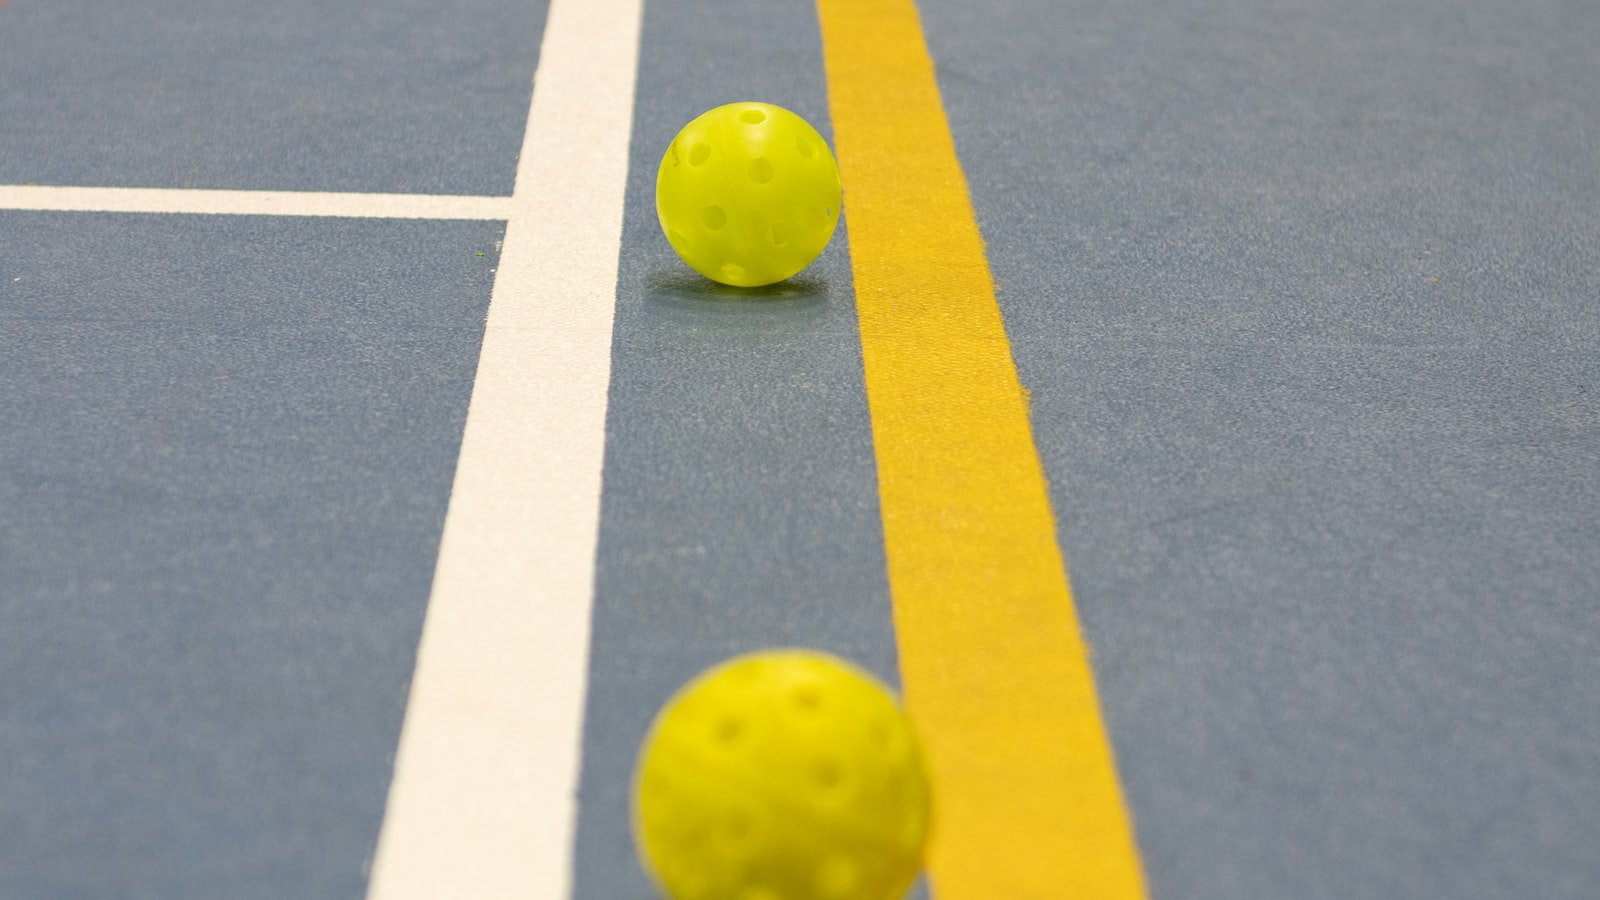 Pickleball: The Rise of an Unlikely Fitness Trend